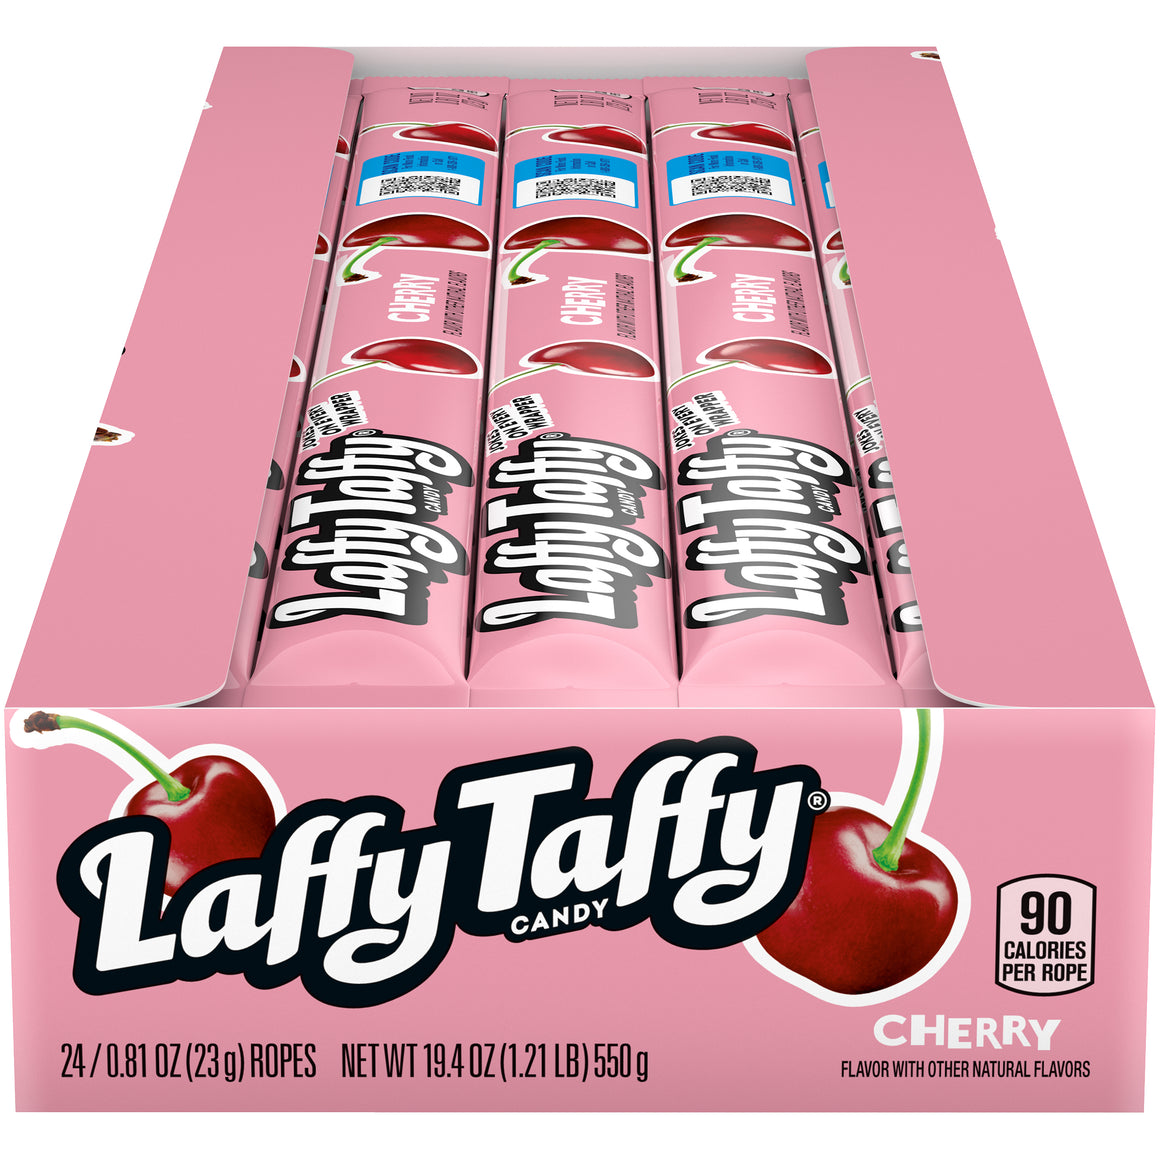 All City Candy Laffy Taffy Cherry Rope .81 oz. 1 Rope Ferrara Candy Company For fresh candy and great service, visit www.allcitycandy.com